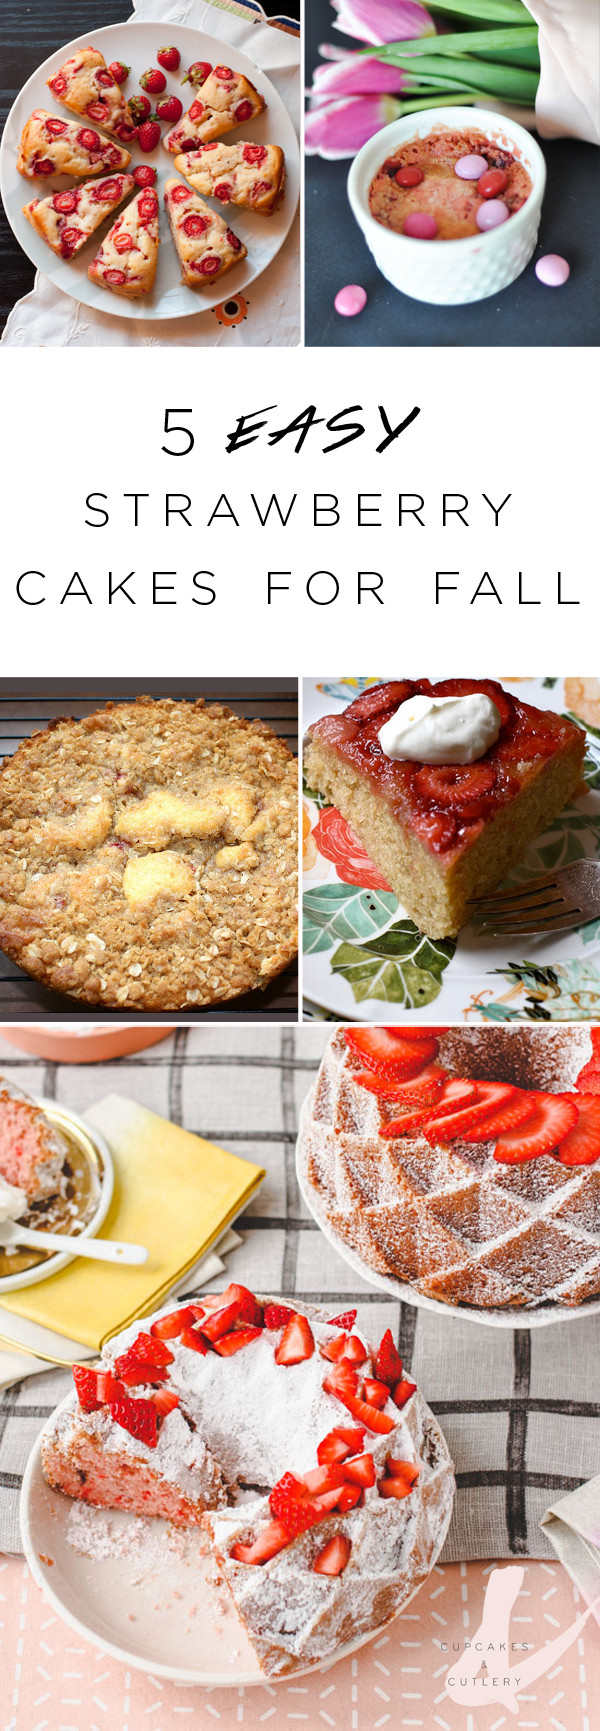 Fall Desserts For A Crowd
 5 Easy Strawberry Cake Recipes for Fall